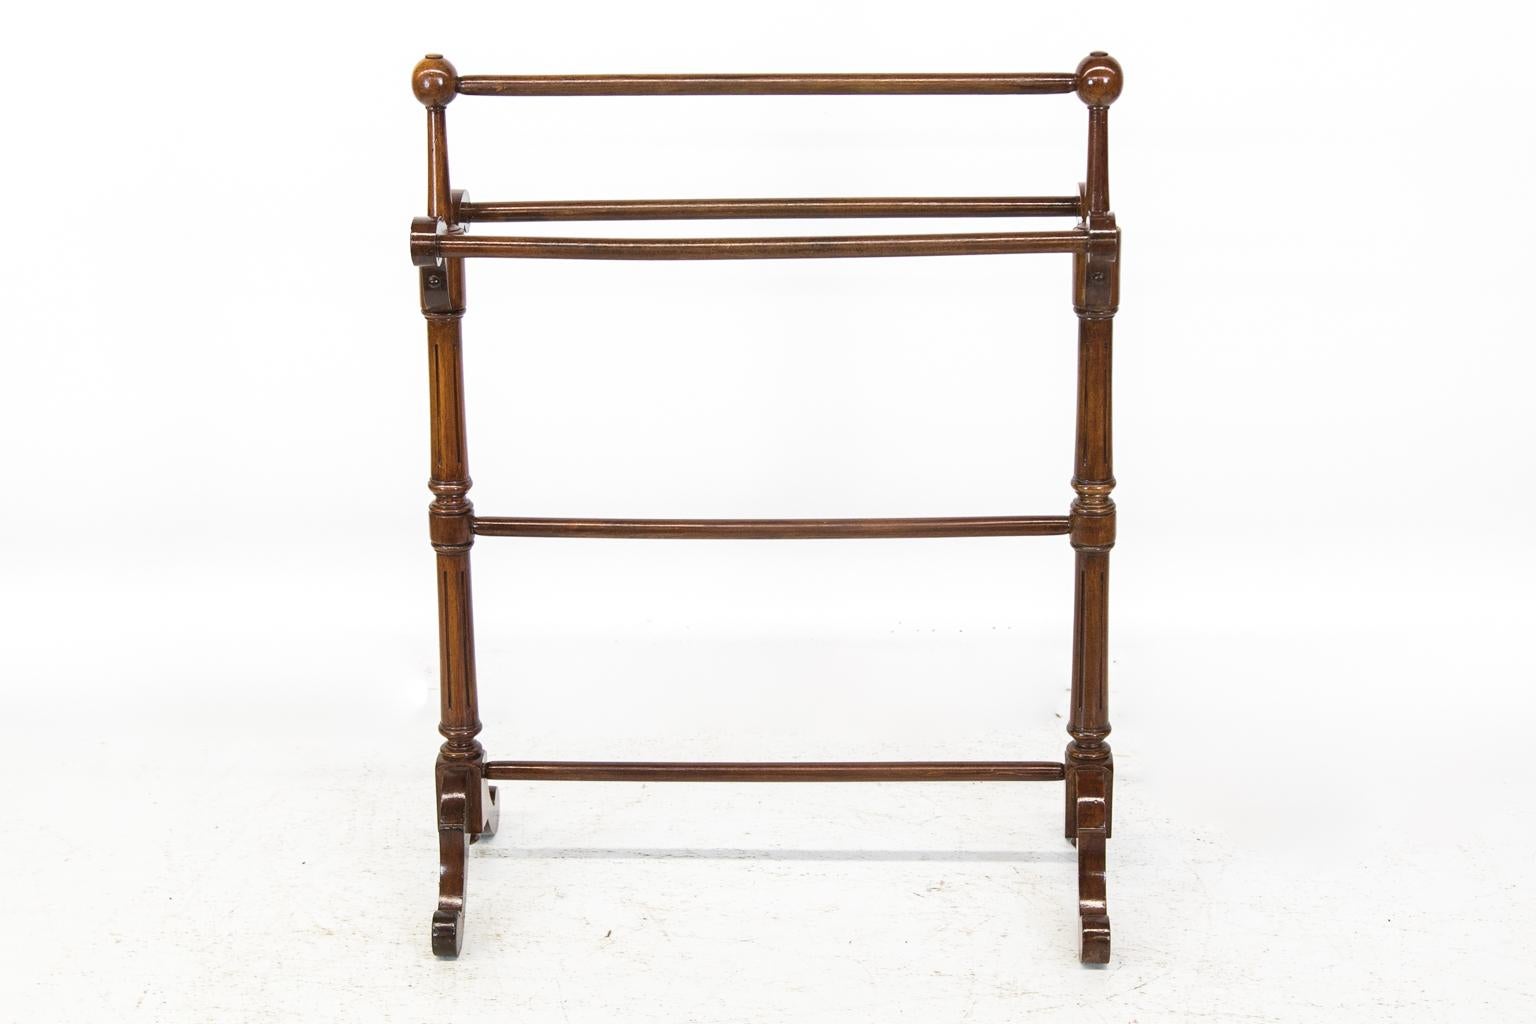 English walnut blanket/towel rack has reeded rail supports and scrolled arms with shaped feet.
  